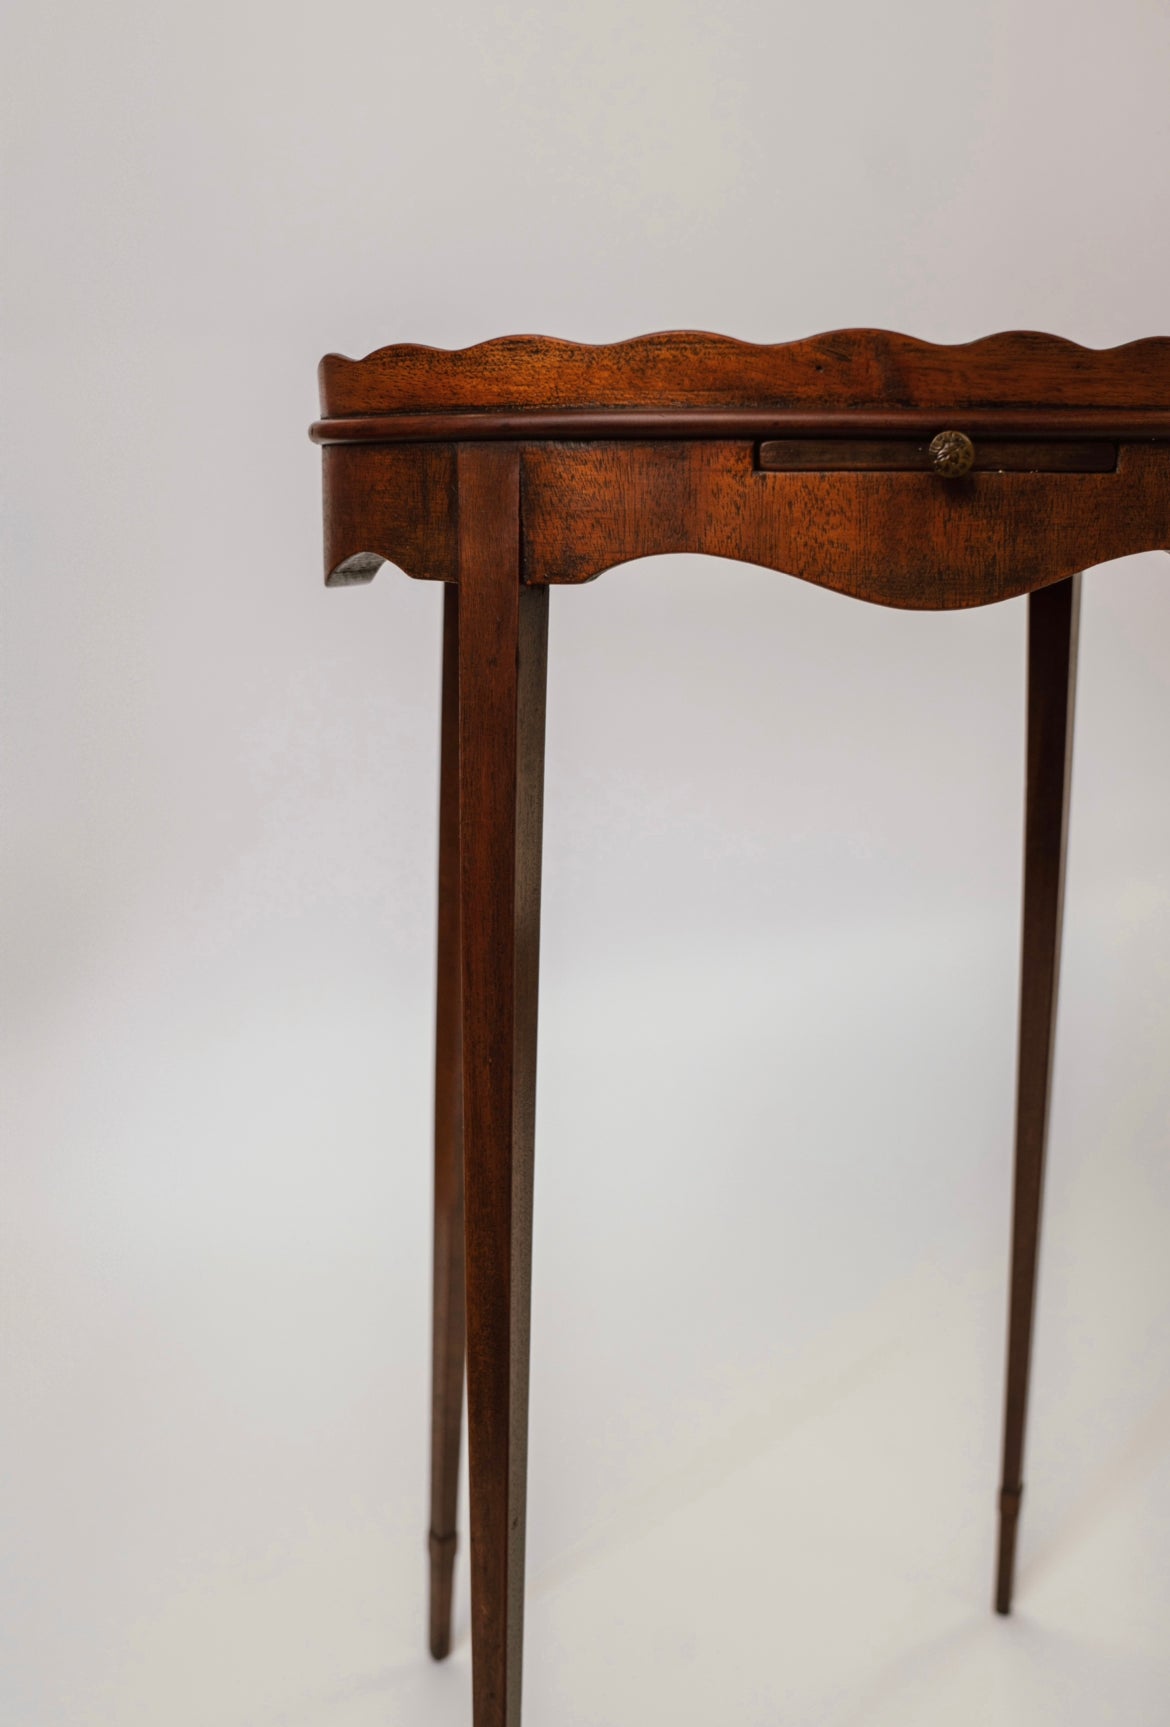 Antique English Georgian Style Mahogany Pedestal Table with Pull Out Tray